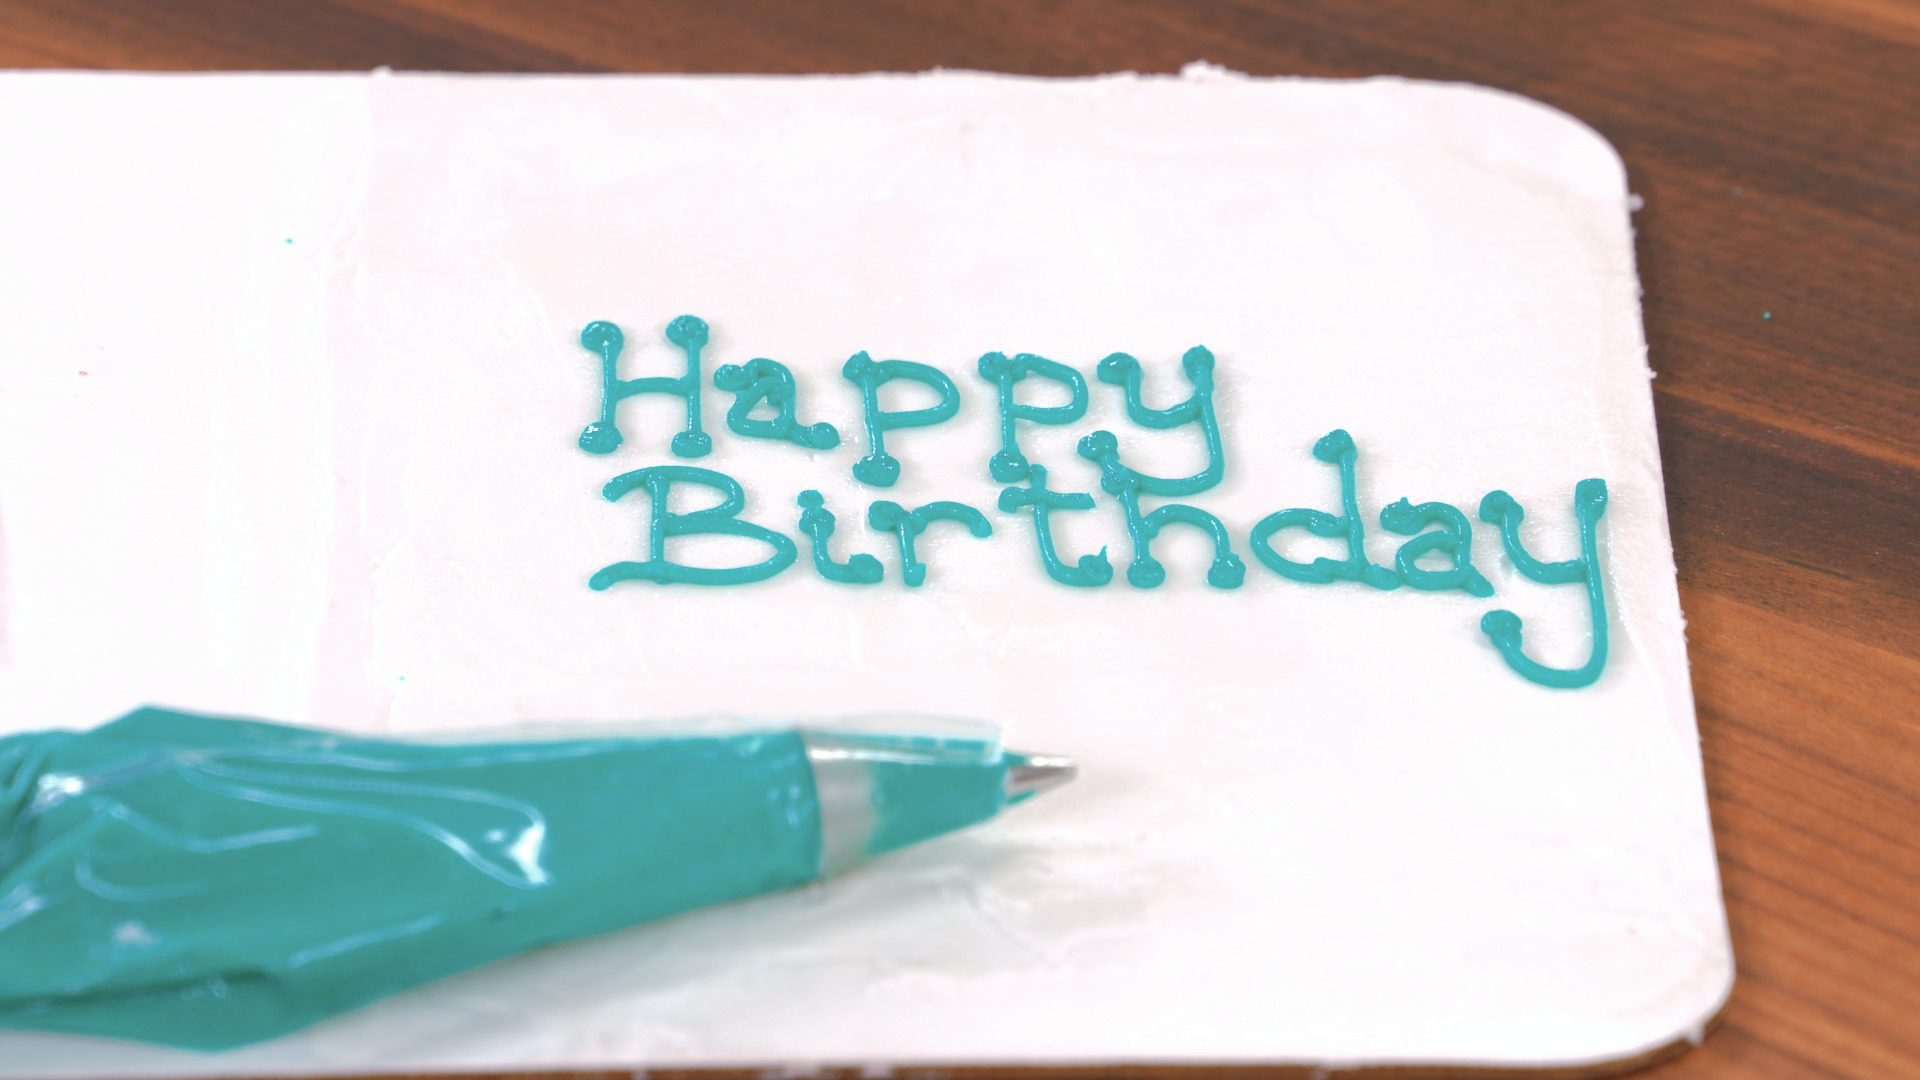 How to Write on a Cake (Cleanly!) | Taste of Home